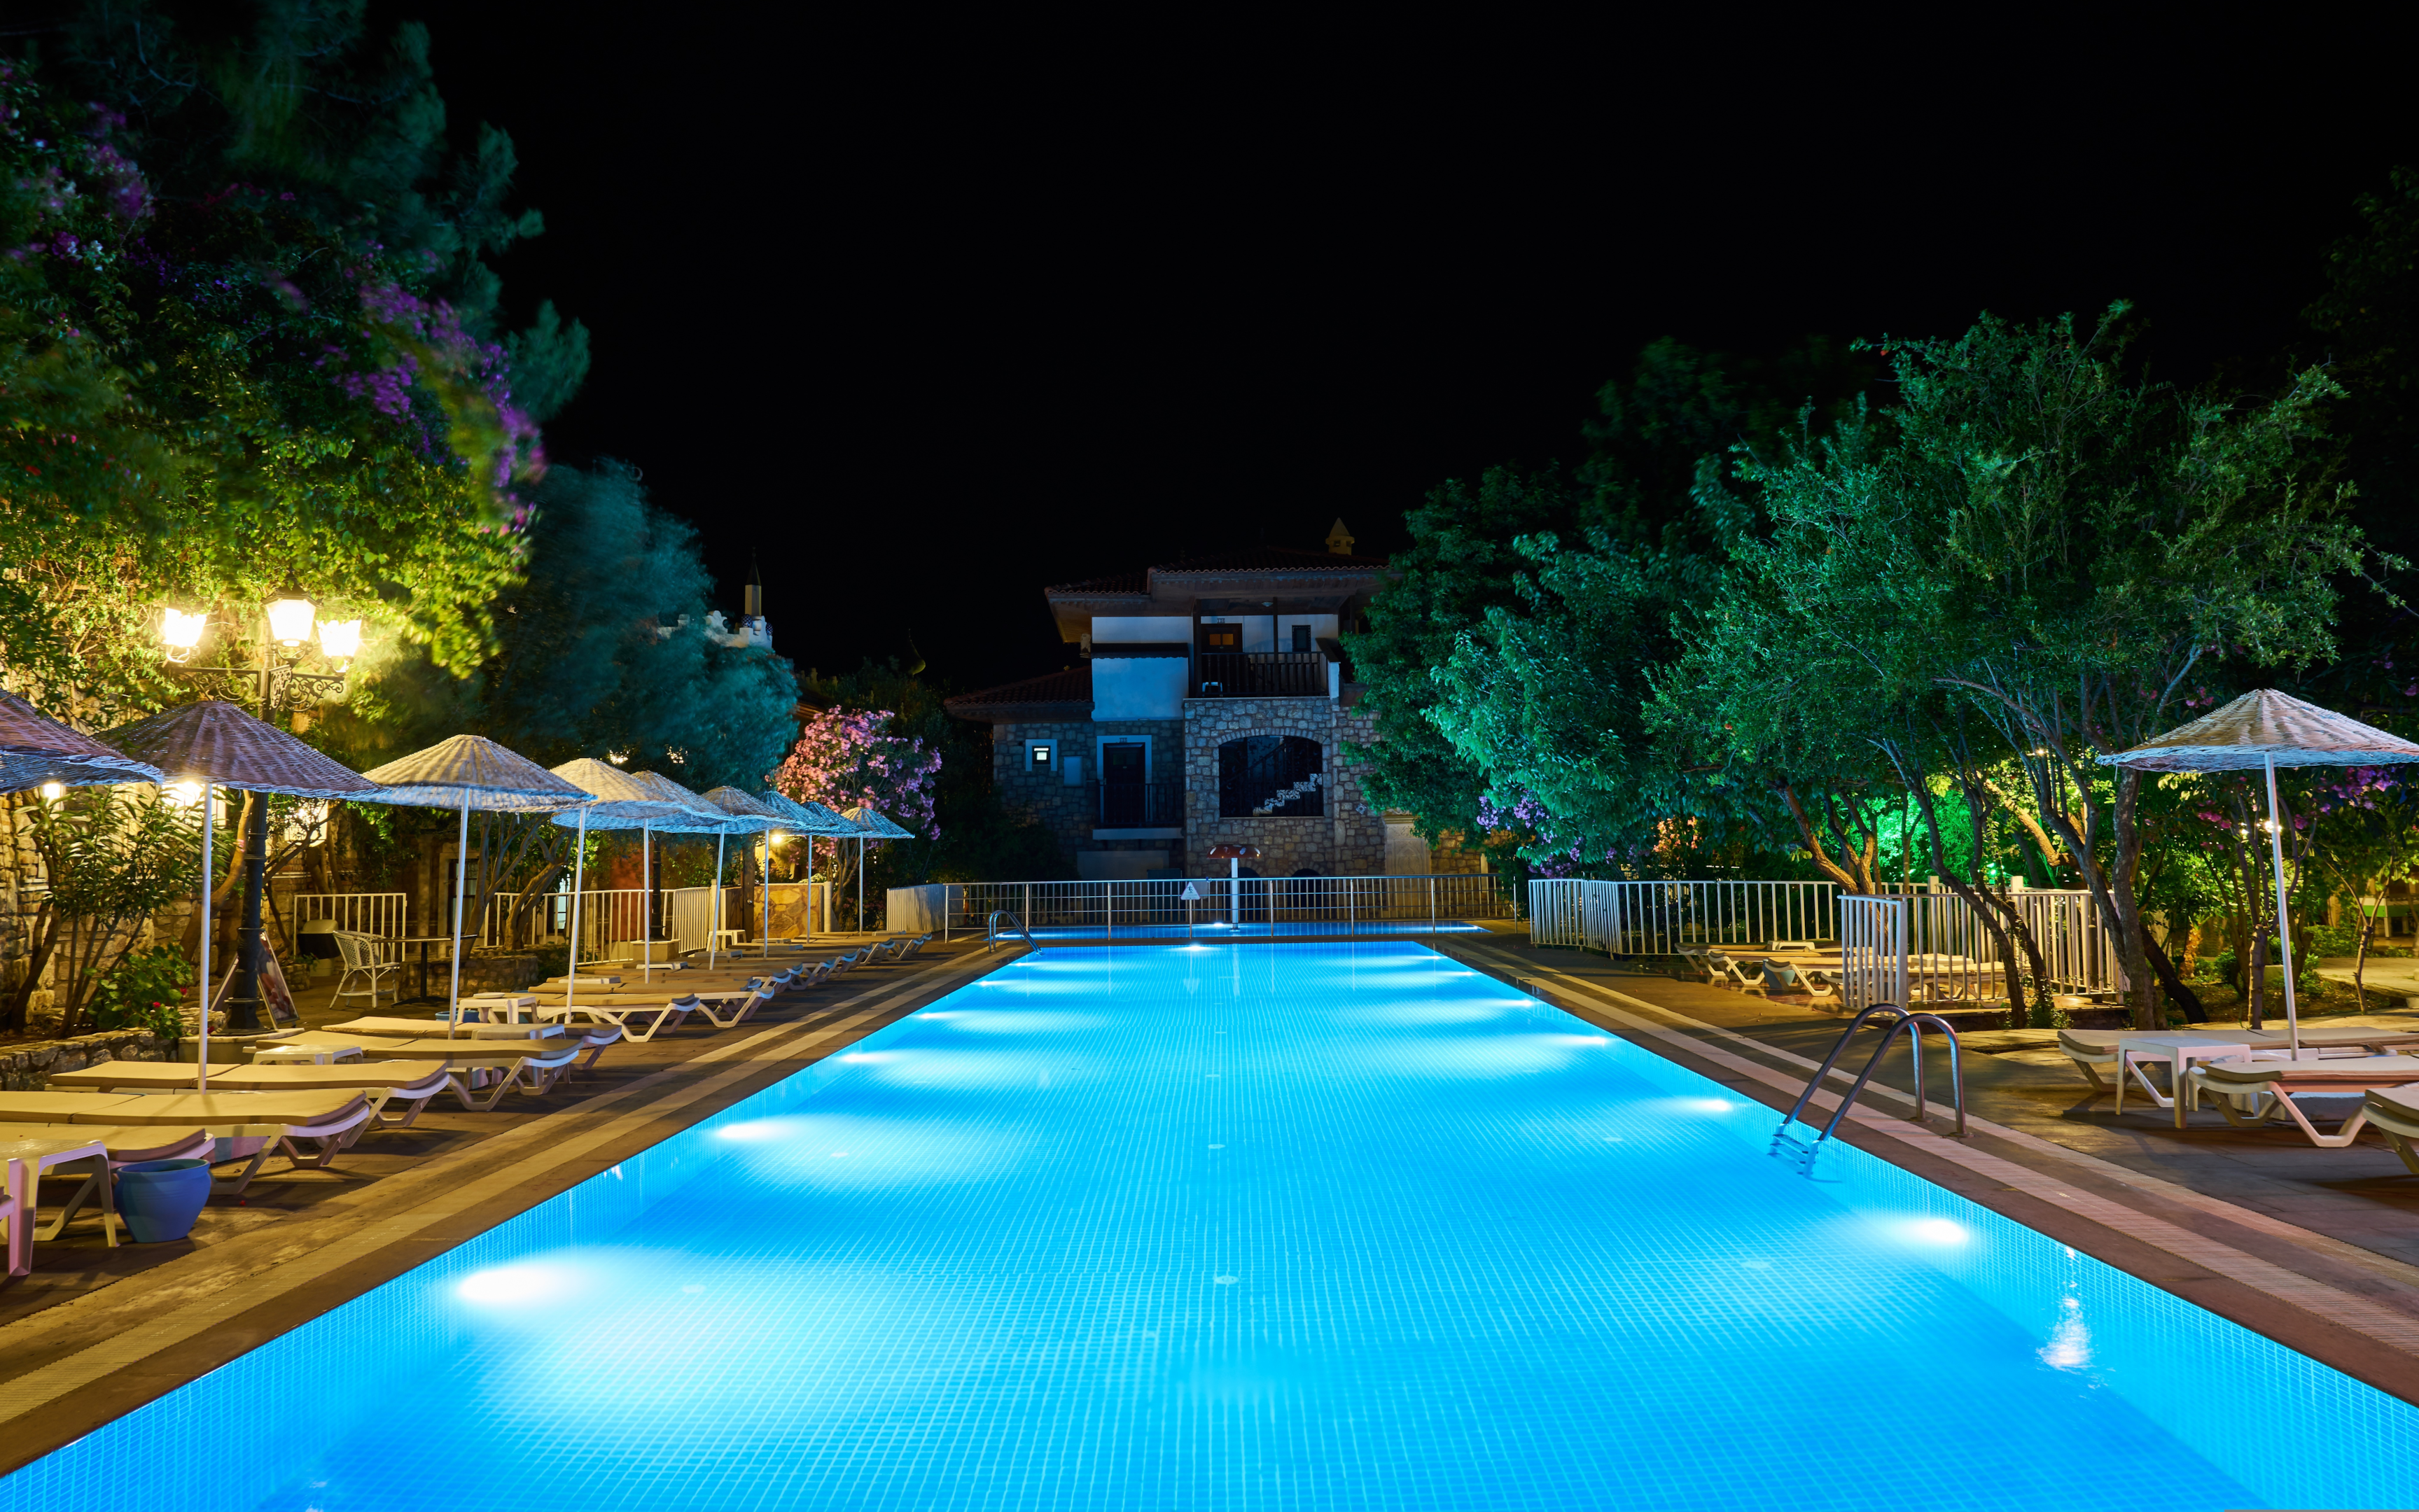 Outdoor Pool Area with Submerged Fountain Lights